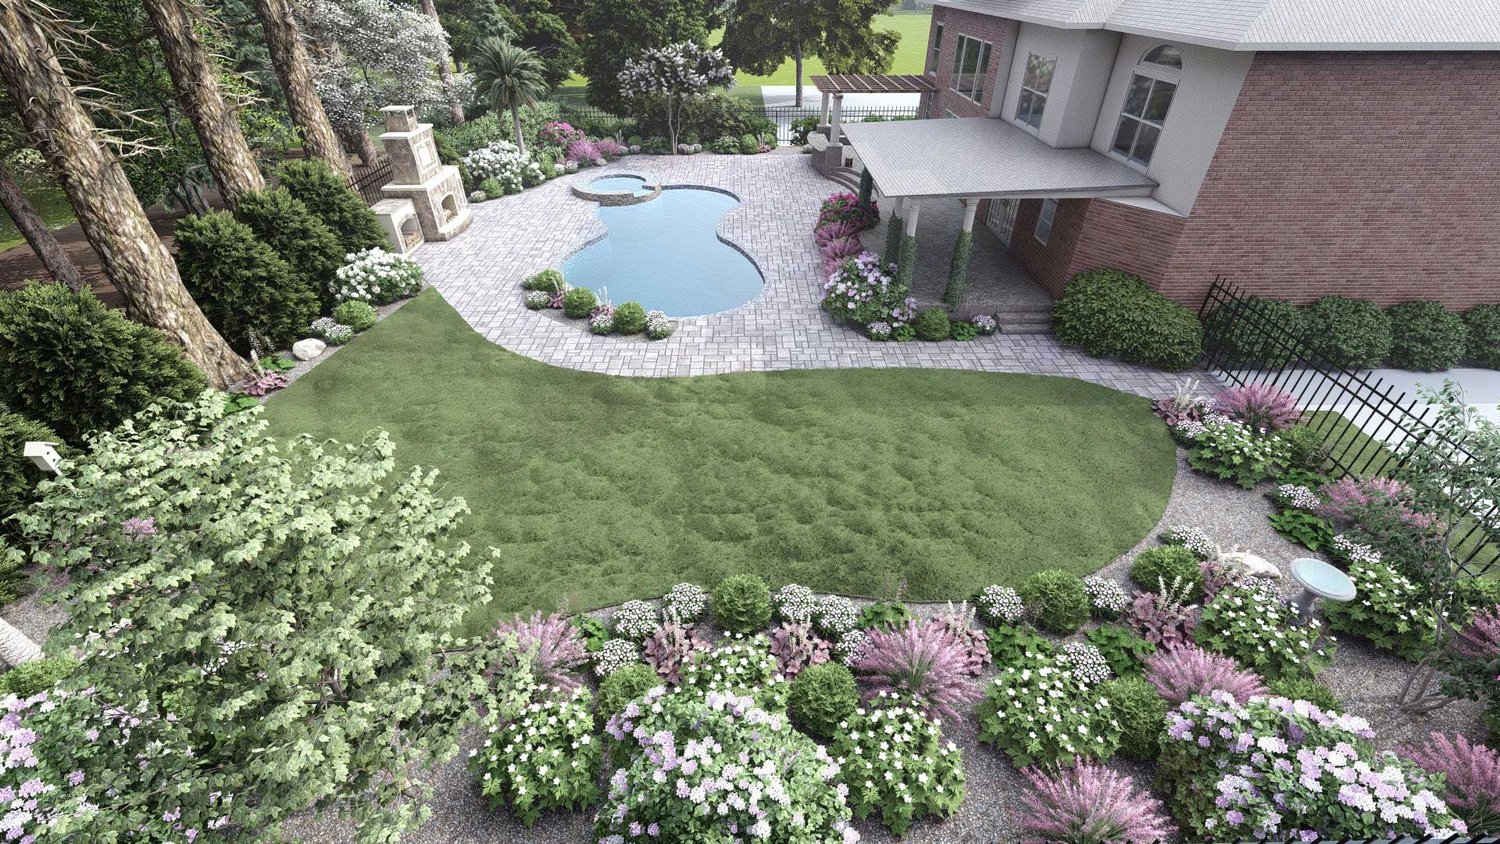 Charlotte overhead view of backyard with garden and swimming pool